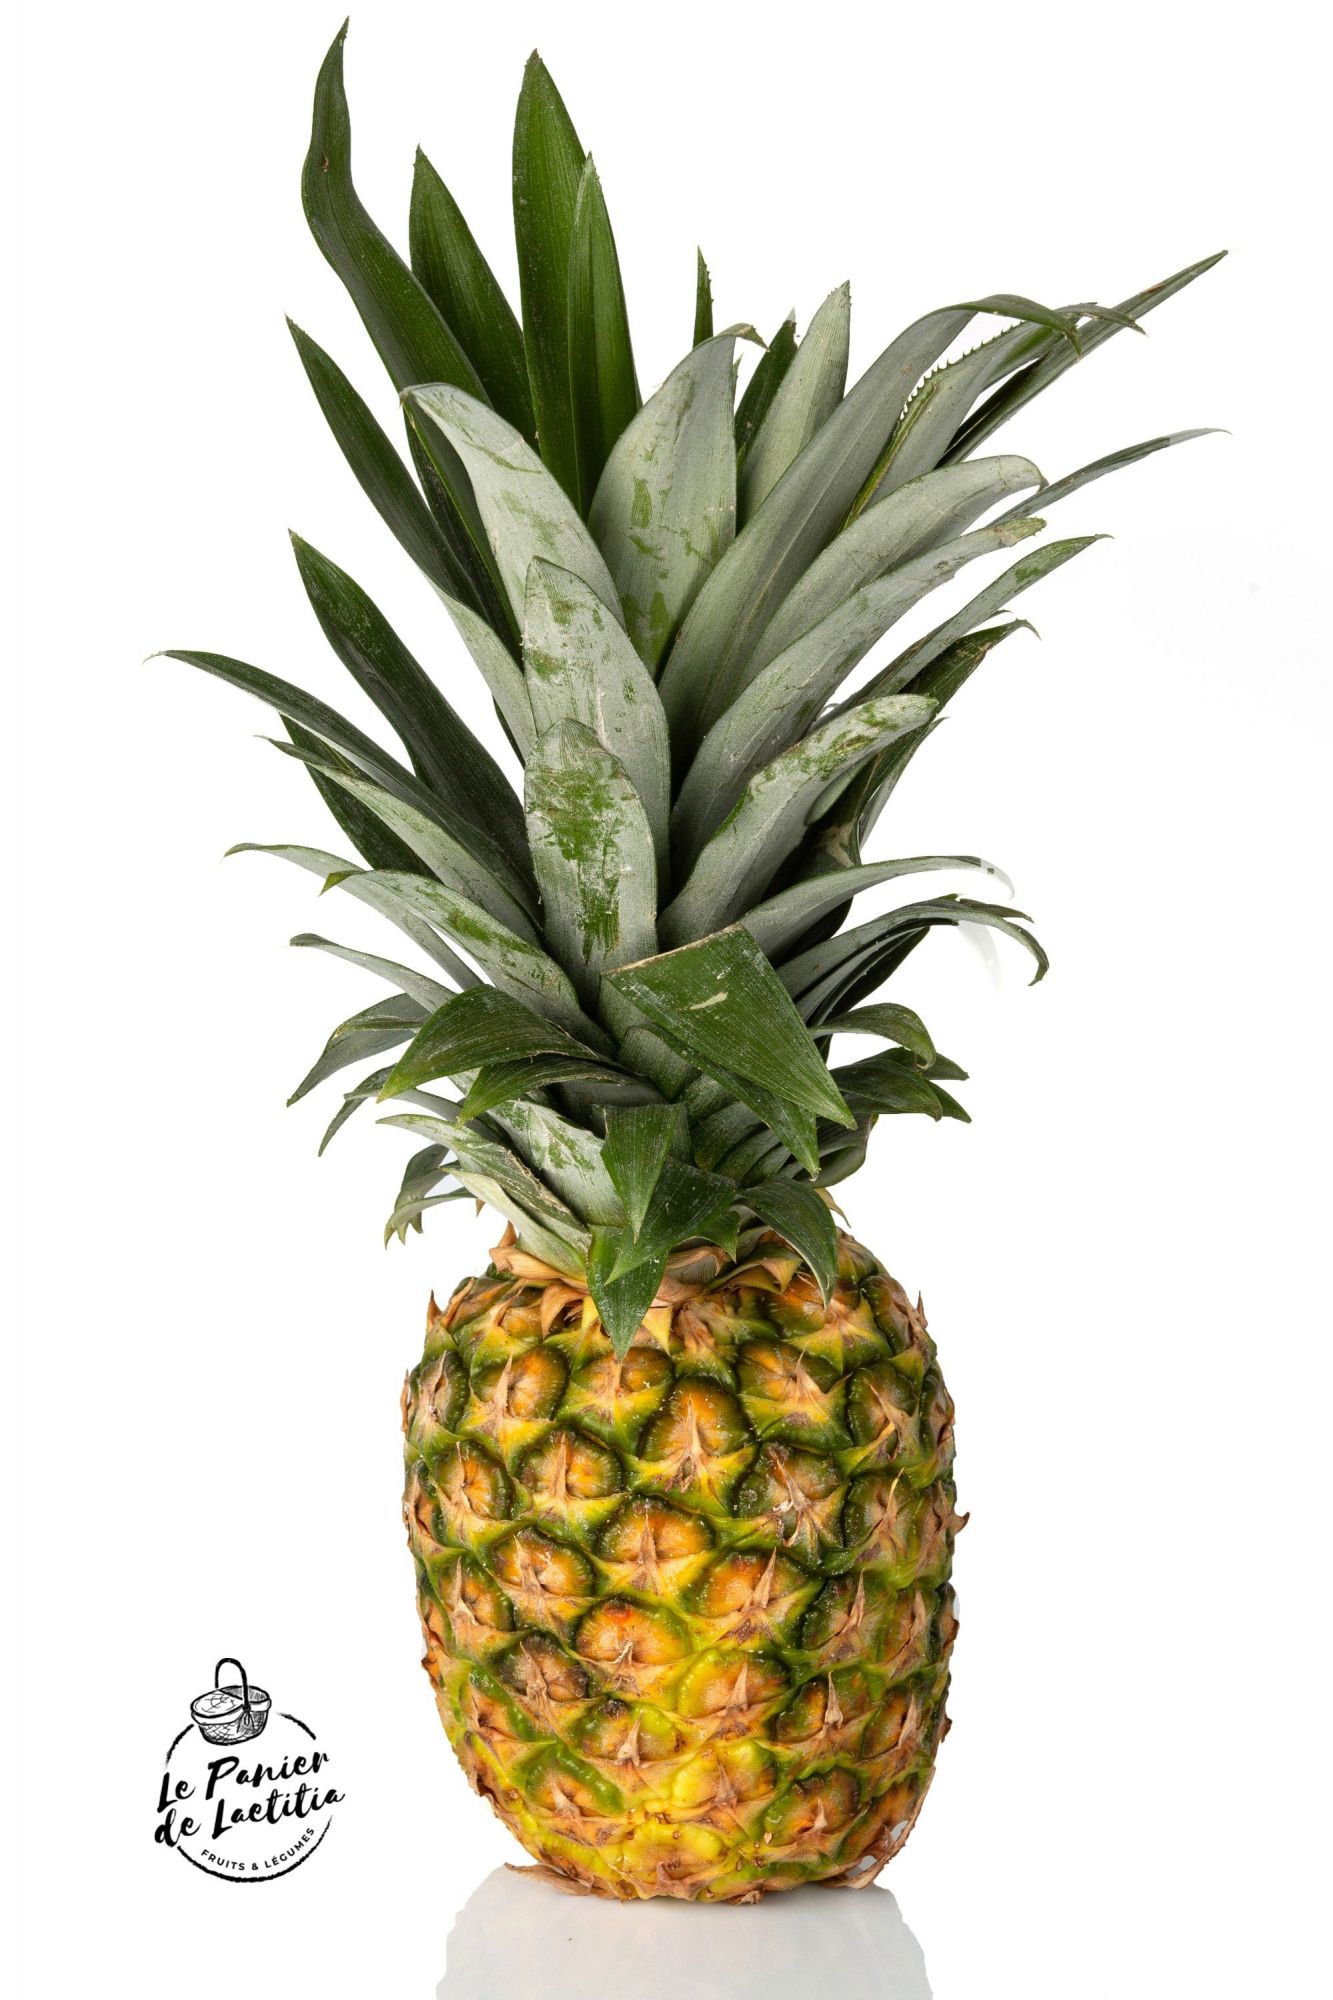 Ananas Extra Sweet (bateau) - Fruits exotiques réf.LPDL-000007